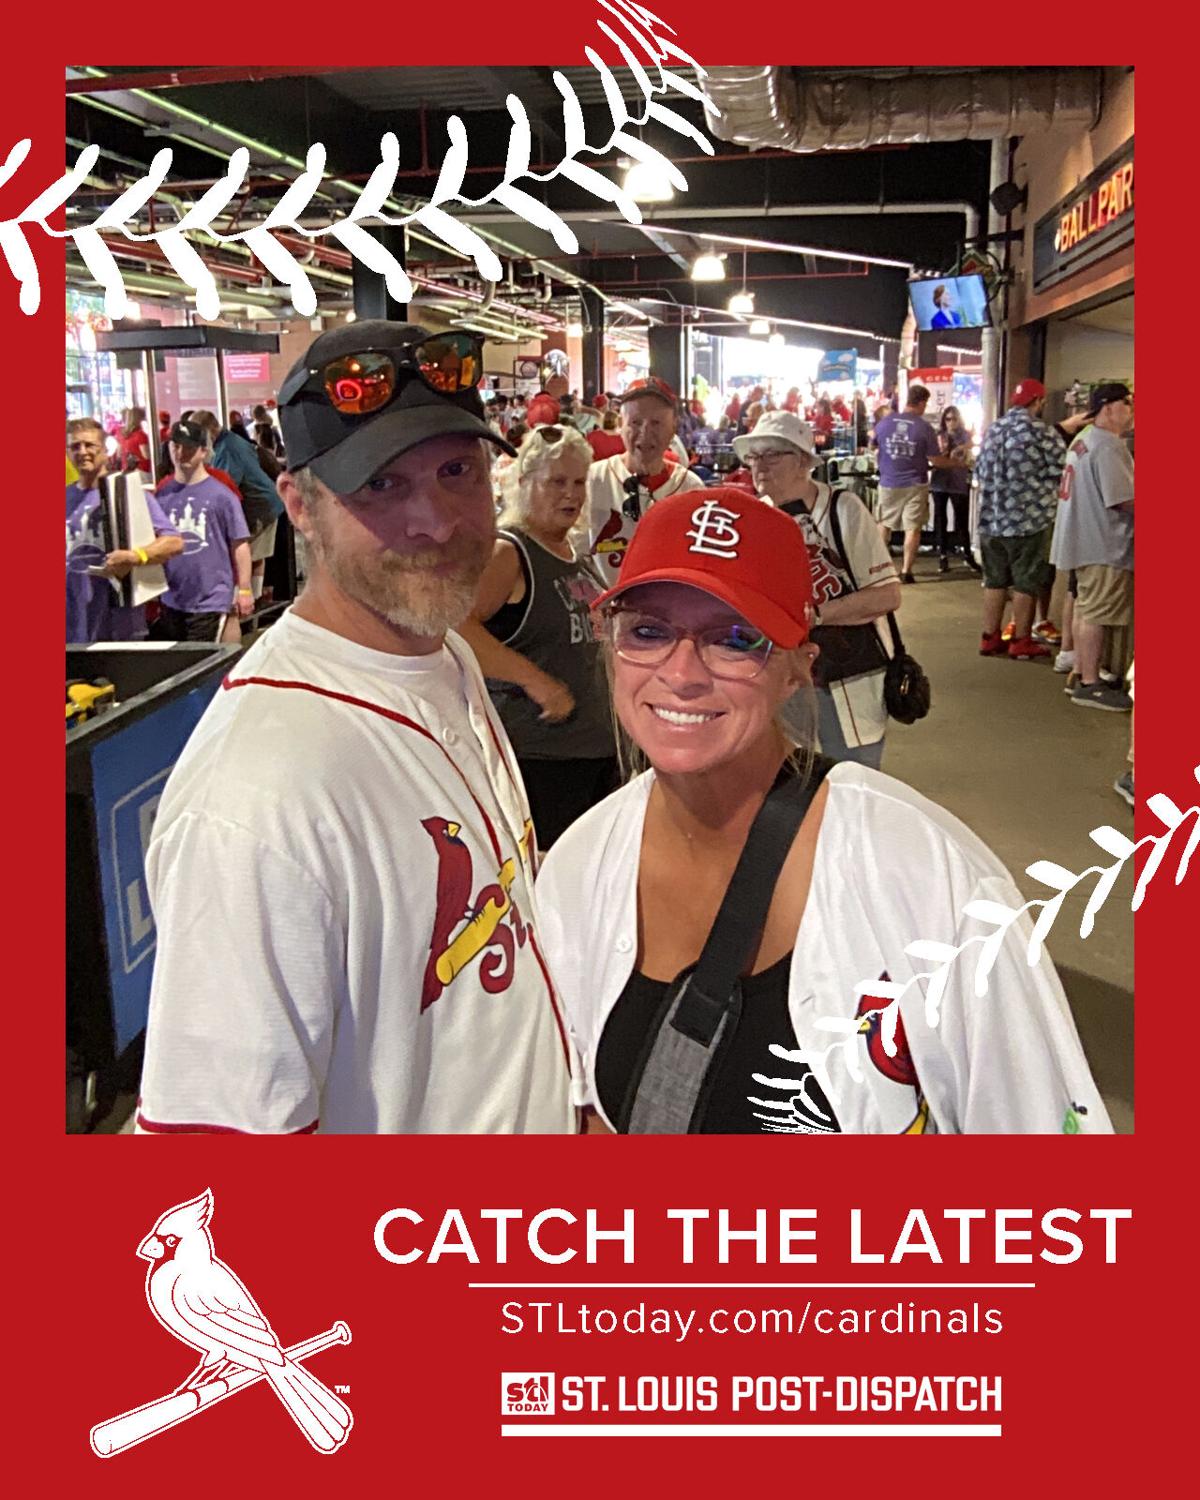 St. Louis Cardinals - The countdown has started! Don't miss